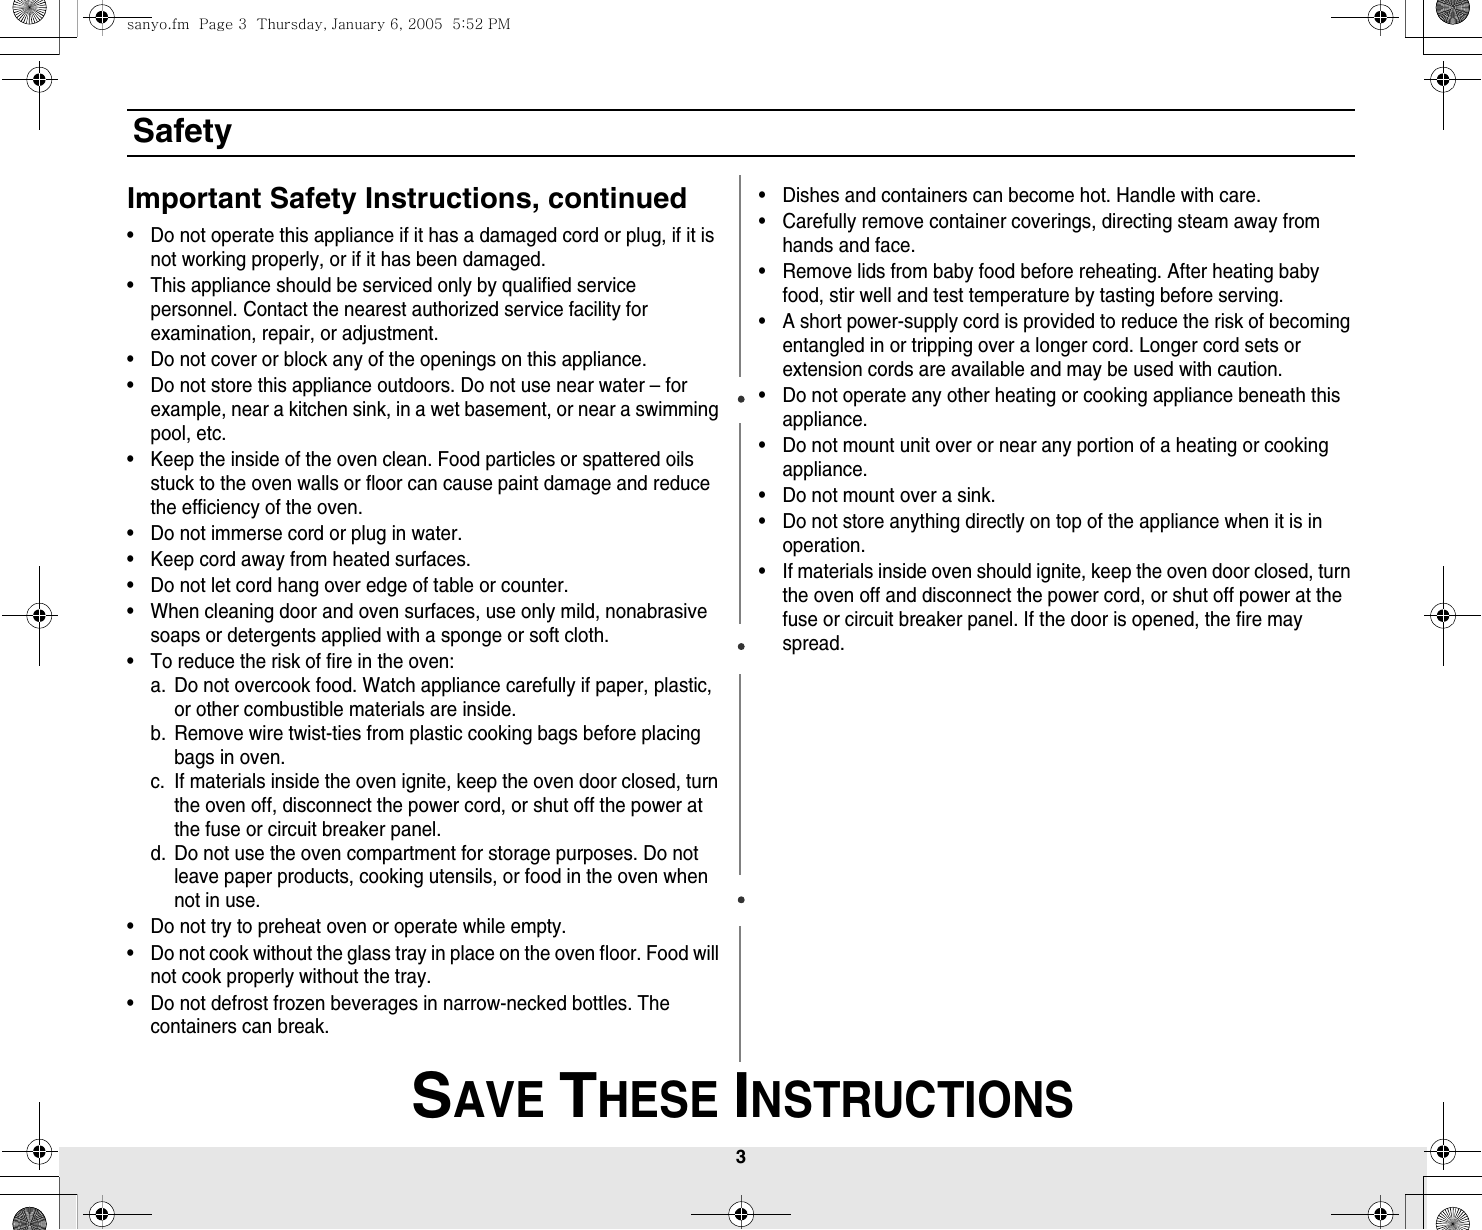 3 SAVE THESE INSTRUCTIONSSafetyImportant Safety Instructions, continued• Do not operate this appliance if it has a damaged cord or plug, if it is not working properly, or if it has been damaged.• This appliance should be serviced only by qualified service personnel. Contact the nearest authorized service facility for examination, repair, or adjustment.• Do not cover or block any of the openings on this appliance.• Do not store this appliance outdoors. Do not use near water – for example, near a kitchen sink, in a wet basement, or near a swimming pool, etc. • Keep the inside of the oven clean. Food particles or spattered oils stuck to the oven walls or floor can cause paint damage and reduce the efficiency of the oven.• Do not immerse cord or plug in water.• Keep cord away from heated surfaces.• Do not let cord hang over edge of table or counter.• When cleaning door and oven surfaces, use only mild, nonabrasive soaps or detergents applied with a sponge or soft cloth.• To reduce the risk of fire in the oven:a. Do not overcook food. Watch appliance carefully if paper, plastic, or other combustible materials are inside.b. Remove wire twist-ties from plastic cooking bags before placing bags in oven.c. If materials inside the oven ignite, keep the oven door closed, turn the oven off, disconnect the power cord, or shut off the power at the fuse or circuit breaker panel.d. Do not use the oven compartment for storage purposes. Do not leave paper products, cooking utensils, or food in the oven when not in use.• Do not try to preheat oven or operate while empty.• Do not cook without the glass tray in place on the oven floor. Food will not cook properly without the tray.• Do not defrost frozen beverages in narrow-necked bottles. The containers can break.• Dishes and containers can become hot. Handle with care.• Carefully remove container coverings, directing steam away from hands and face.• Remove lids from baby food before reheating. After heating baby food, stir well and test temperature by tasting before serving.• A short power-supply cord is provided to reduce the risk of becoming entangled in or tripping over a longer cord. Longer cord sets or extension cords are available and may be used with caution.  • Do not operate any other heating or cooking appliance beneath this appliance.• Do not mount unit over or near any portion of a heating or cooking appliance.• Do not mount over a sink.• Do not store anything directly on top of the appliance when it is in operation.• If materials inside oven should ignite, keep the oven door closed, turn the oven off and disconnect the power cord, or shut off power at the fuse or circuit breaker panel. If the door is opened, the fire may spread.sanyo.fm  Page 3  Thursday, January 6, 2005  5:52 PM